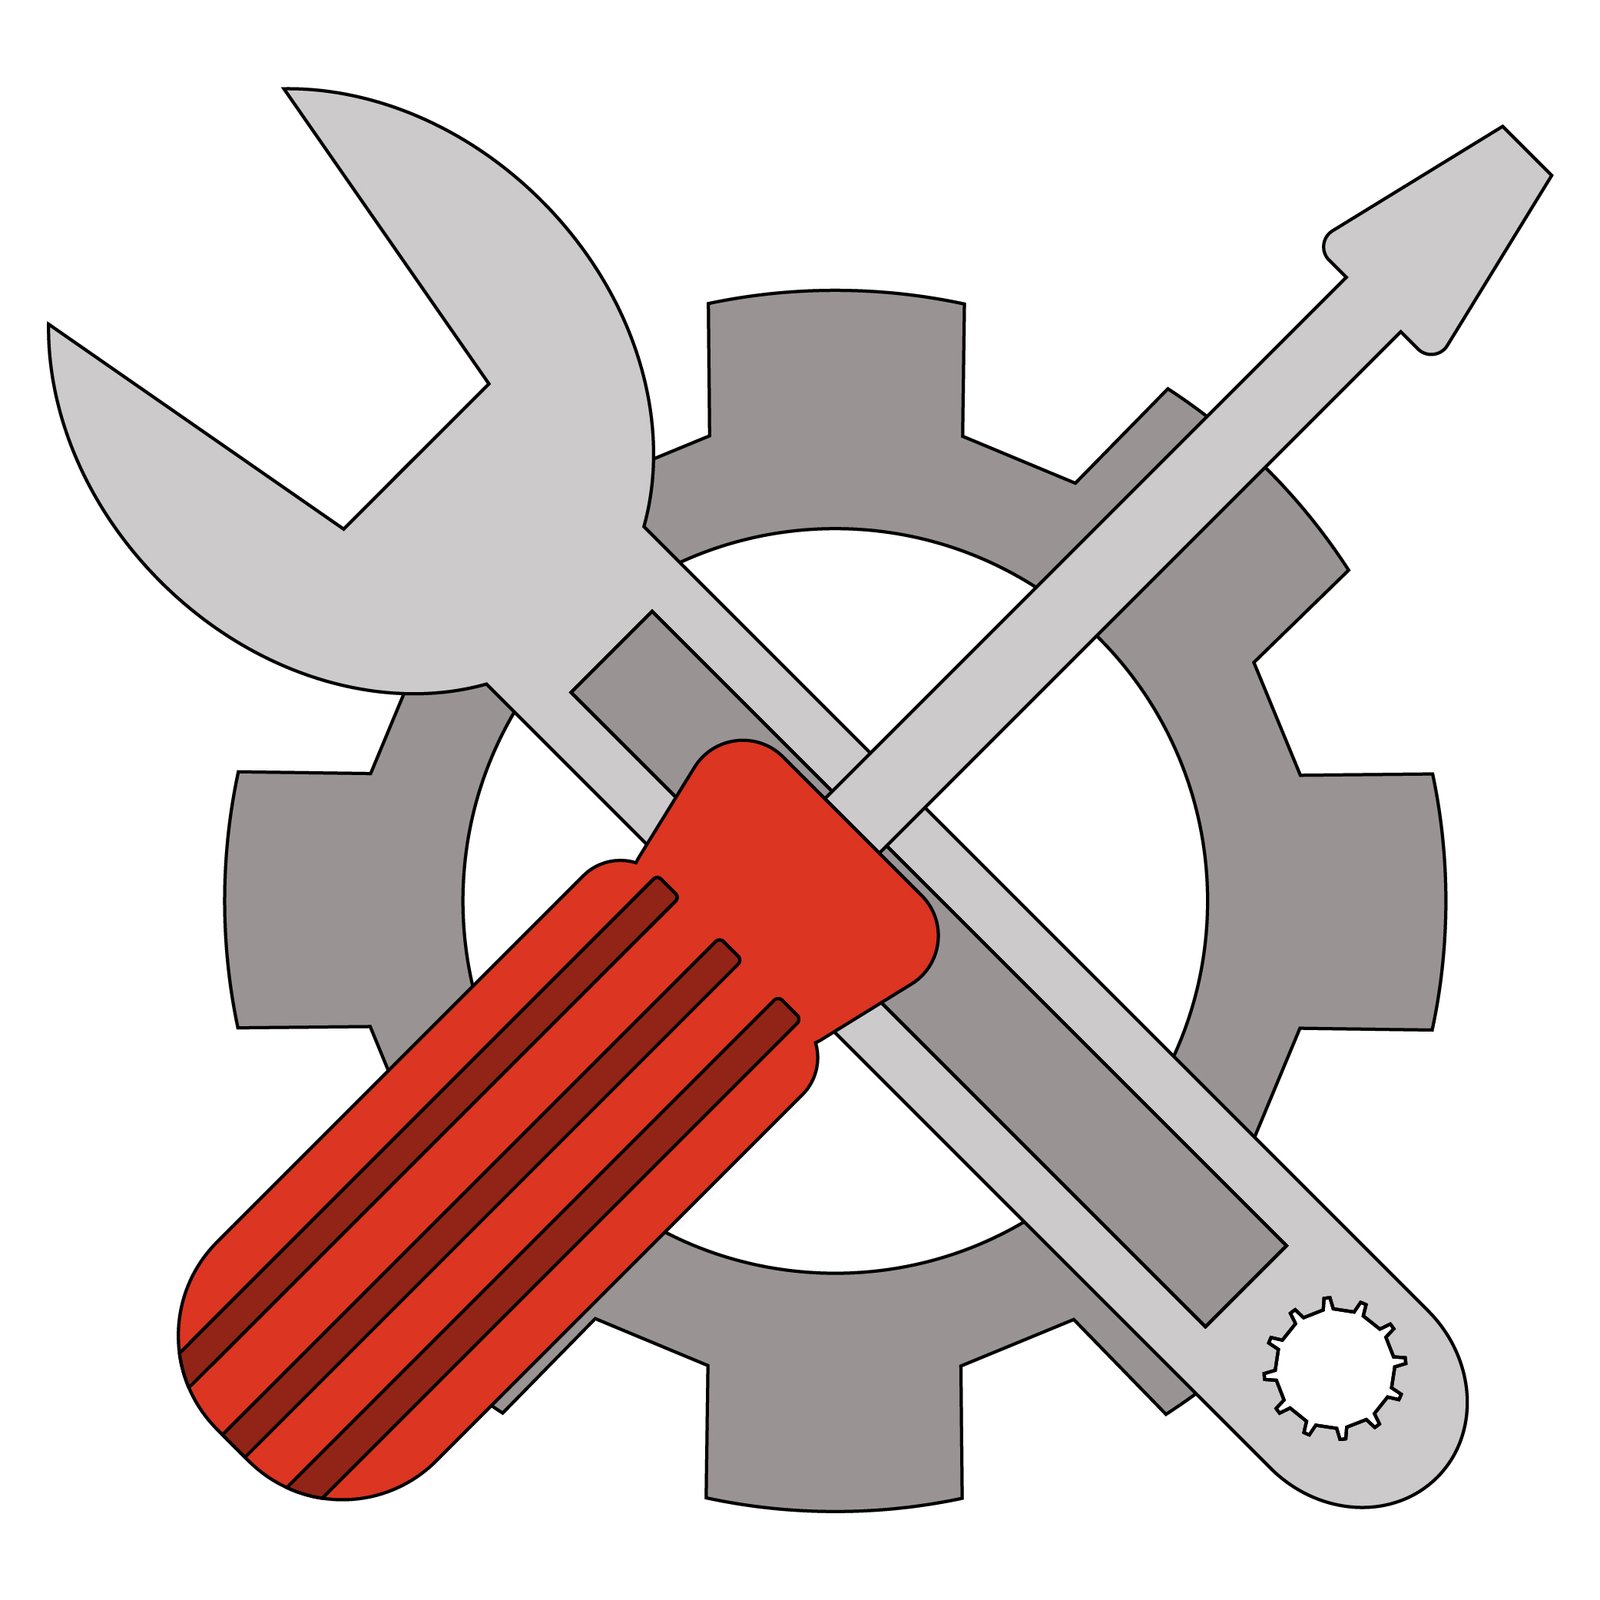 Repair Services Symbol with a wrentch and screwdriver crossed over a gear.